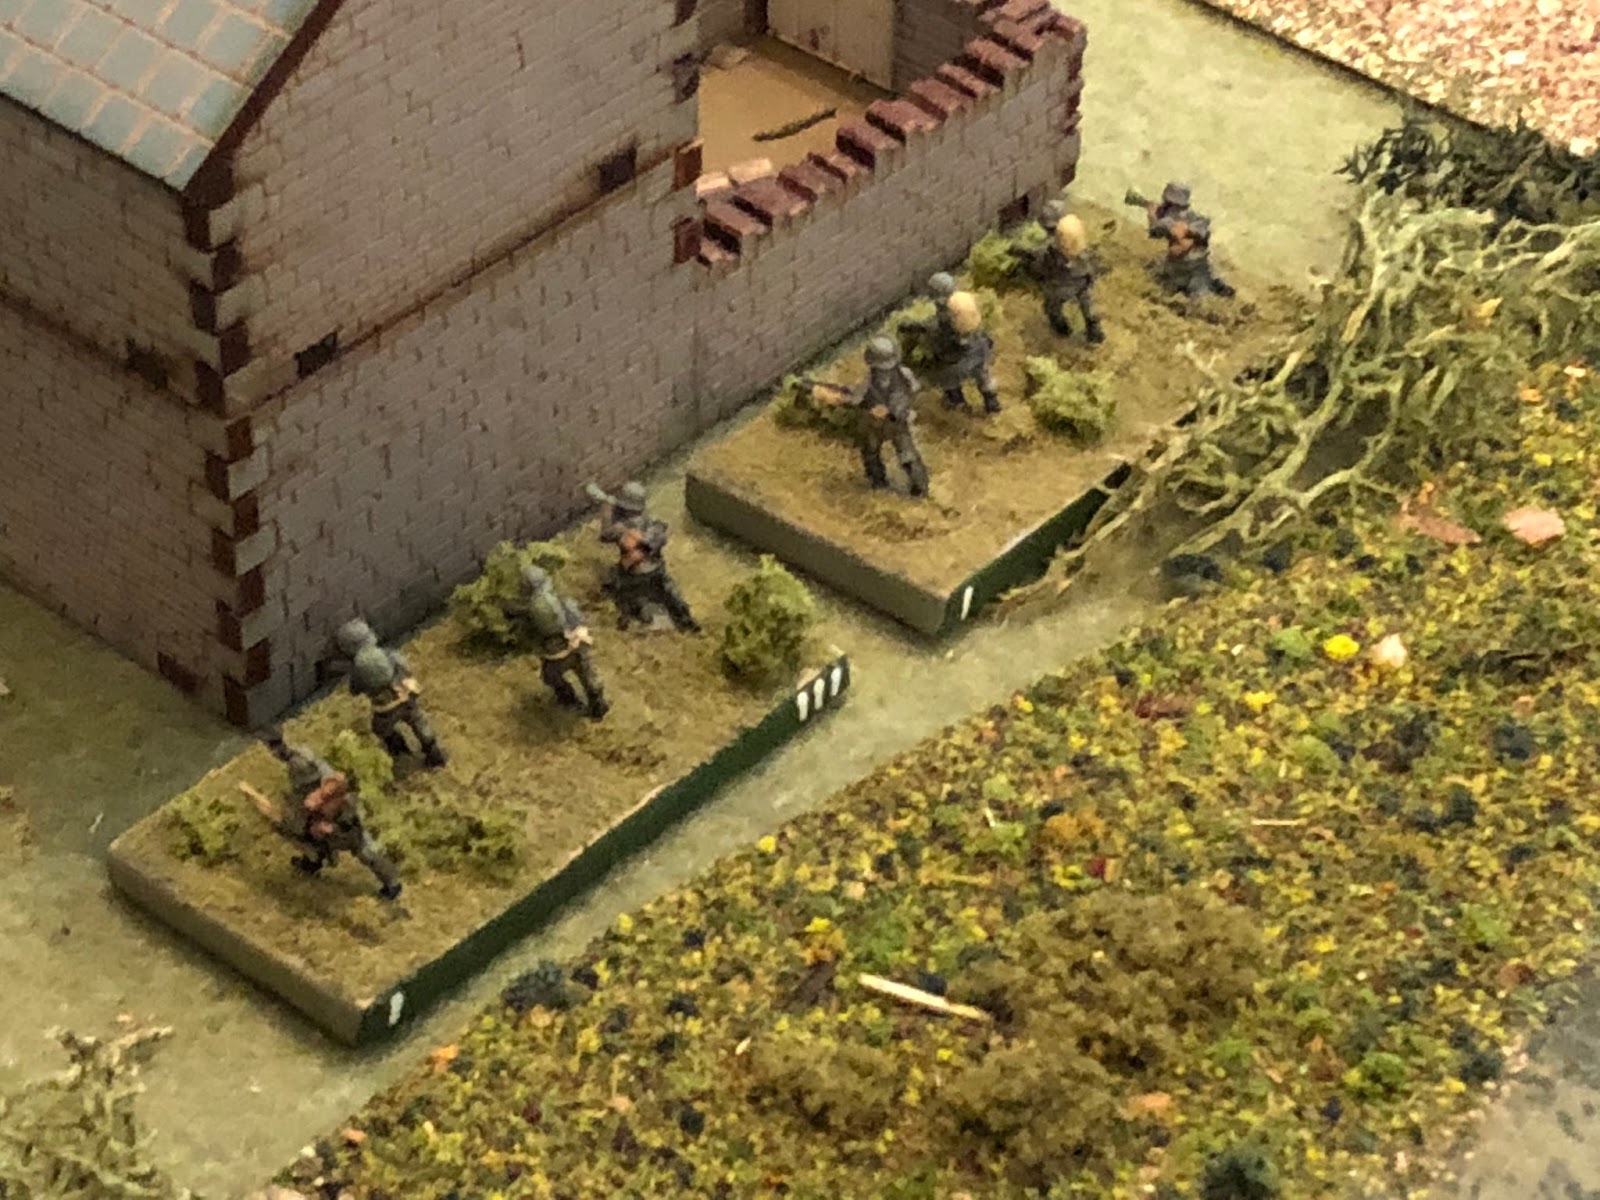  And the two German engineer squads are discovered before they can surprise anyone with their flamethrower...   